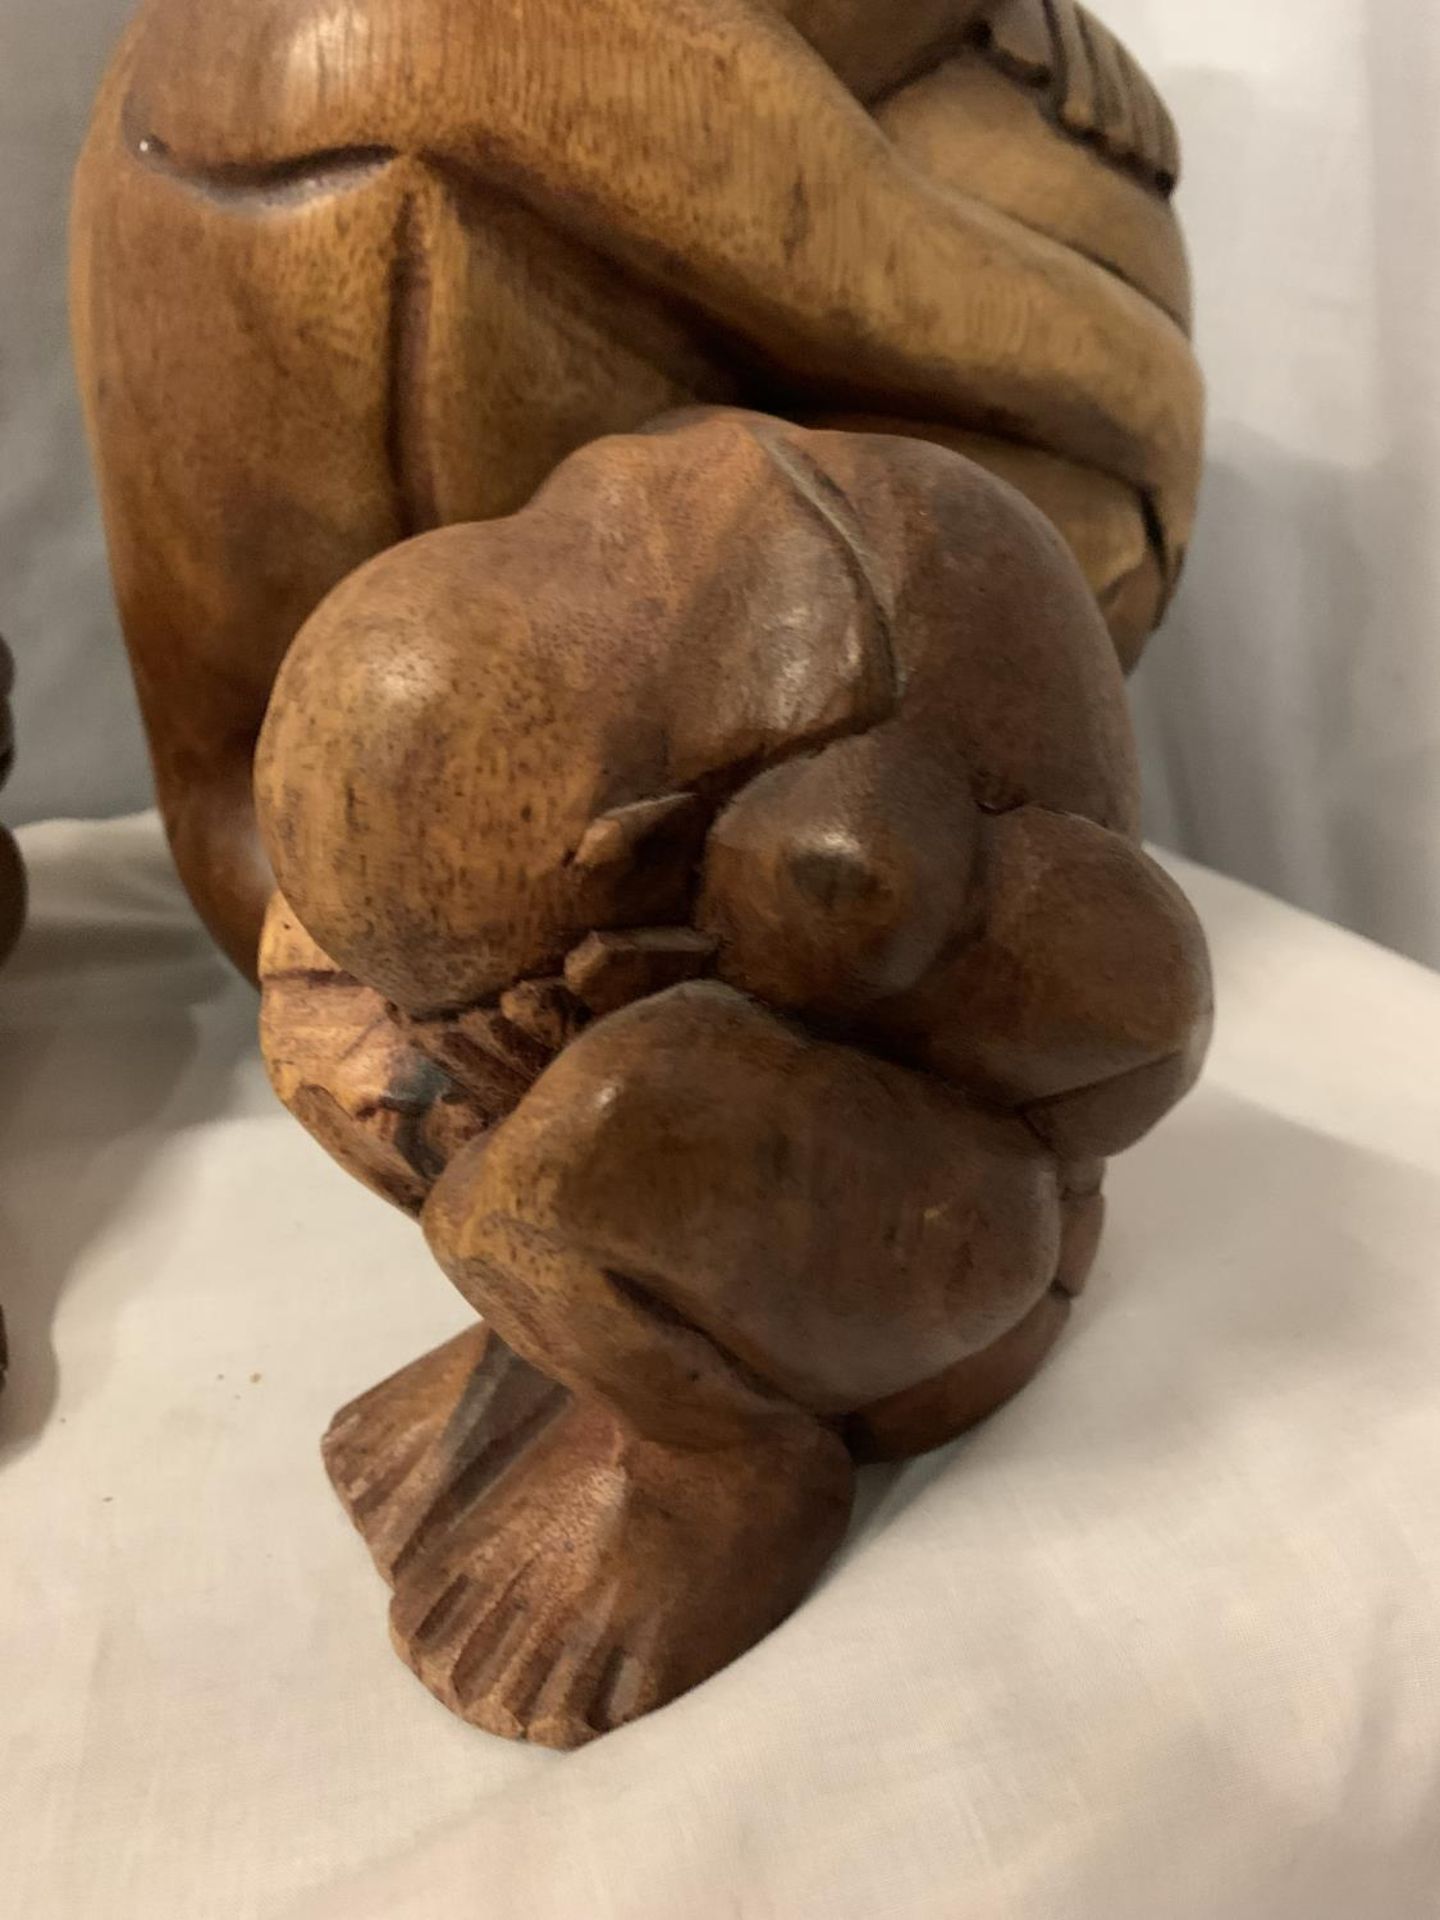 A SET OF THREE CARVED WOODEN FIGURES, ONE OF AN EMBRACING COUPLE, TWO INDIVIDUAL FIGURES - Image 2 of 5